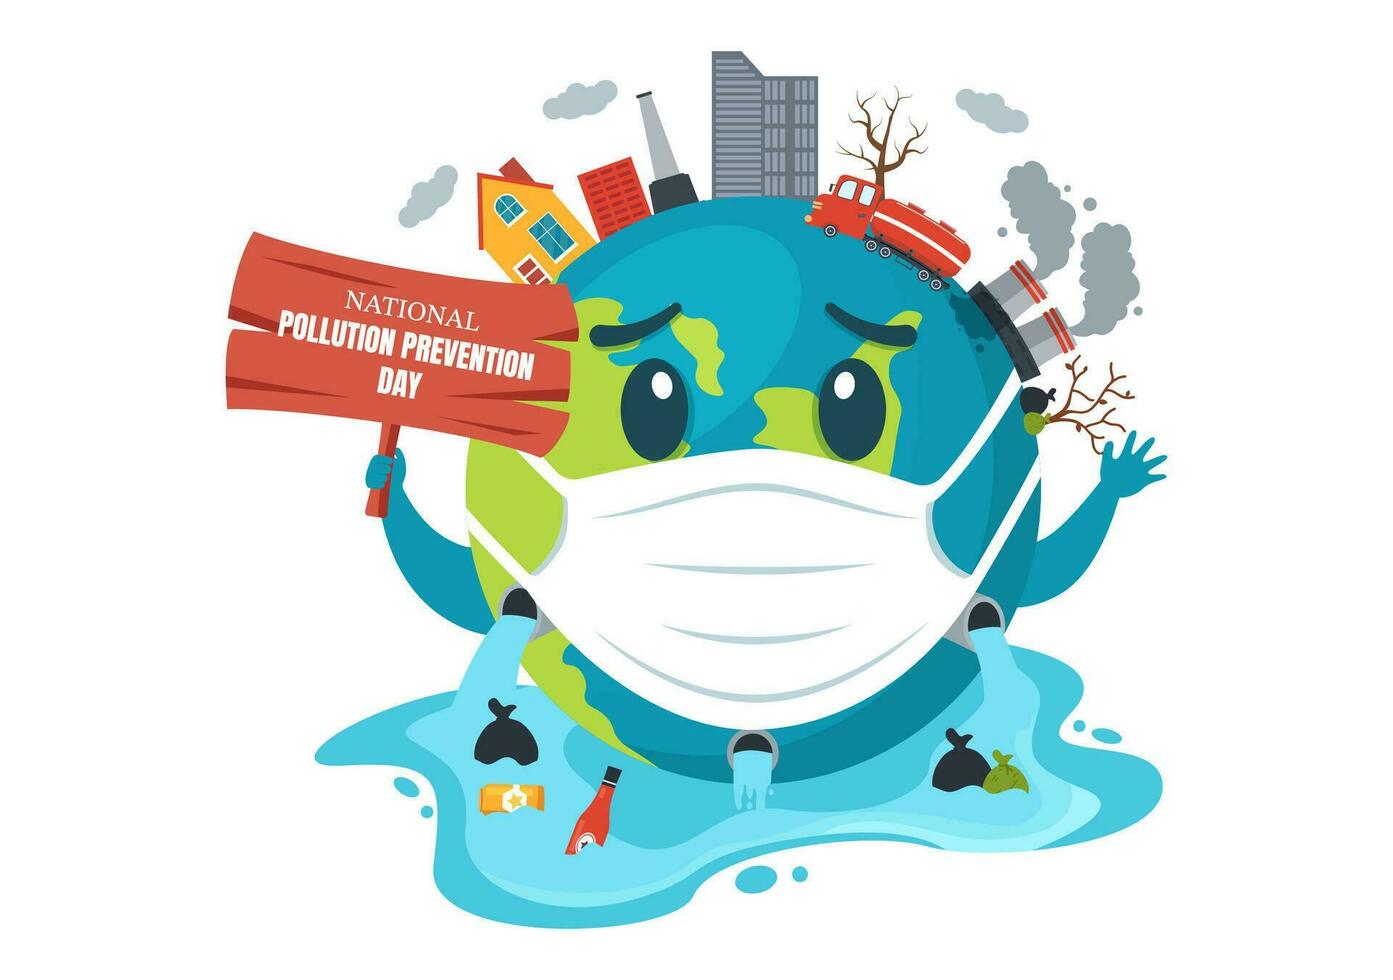 National Pollution Prevention Day Vector Illustration on 2 December for Awareness Campaign Factory, Forest or Vehicle Problems in Cartoon Background